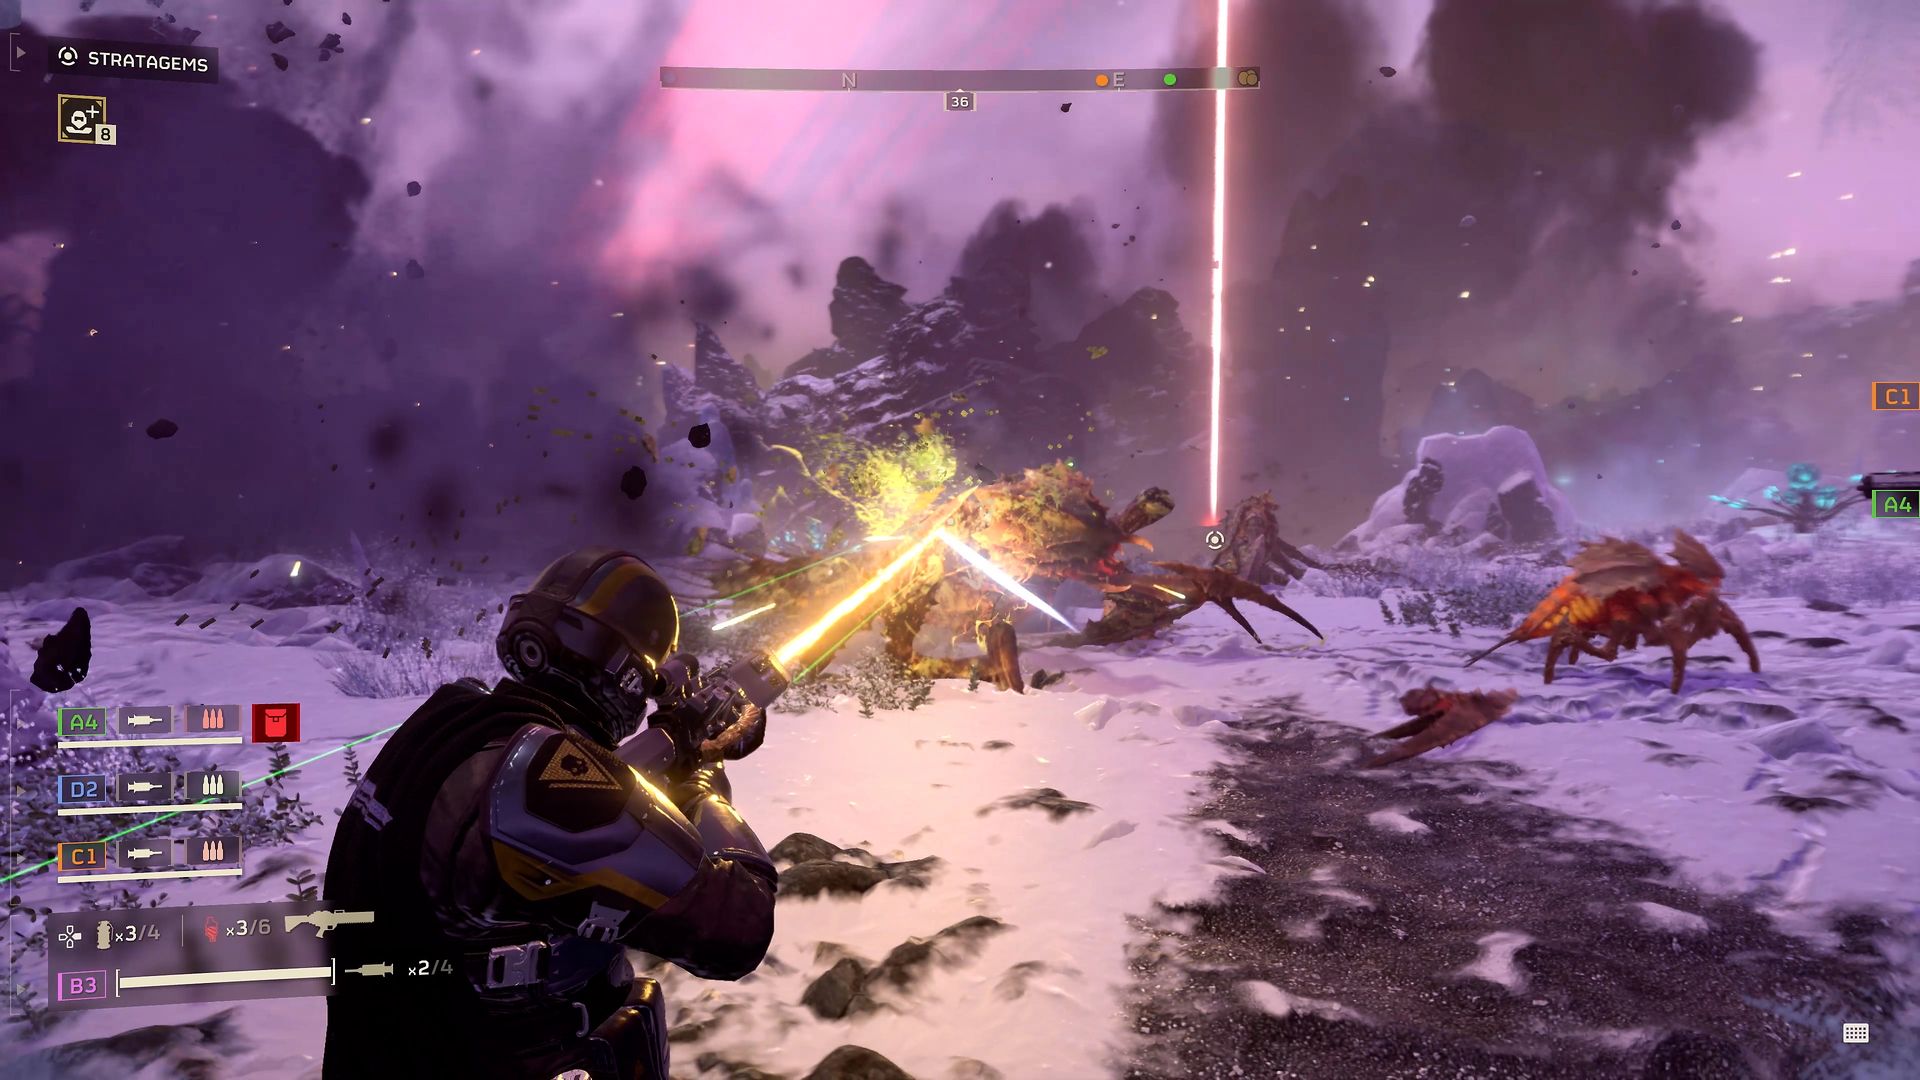 Helldivers 2 Xbox petition